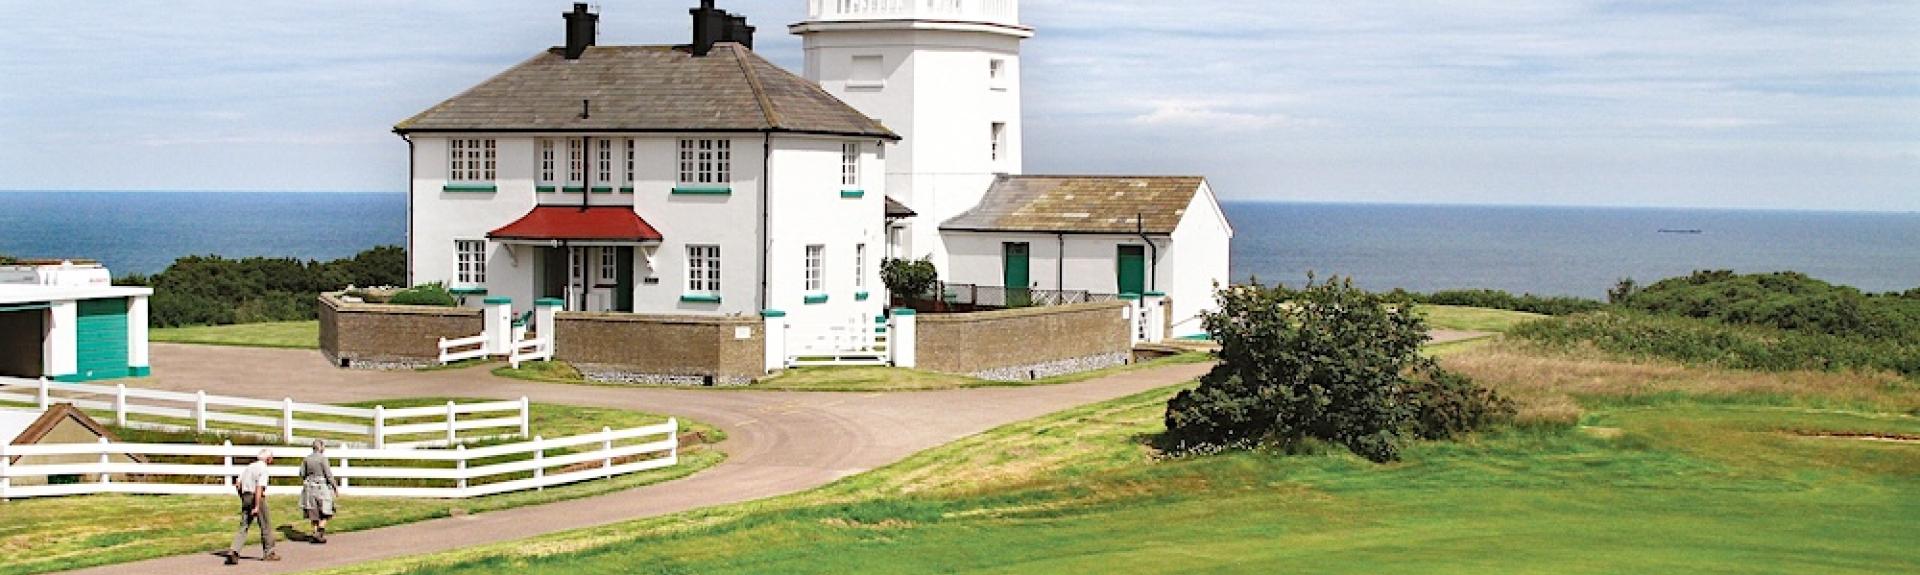 A lighthouse on the edge of a golf links with sea views in the background.